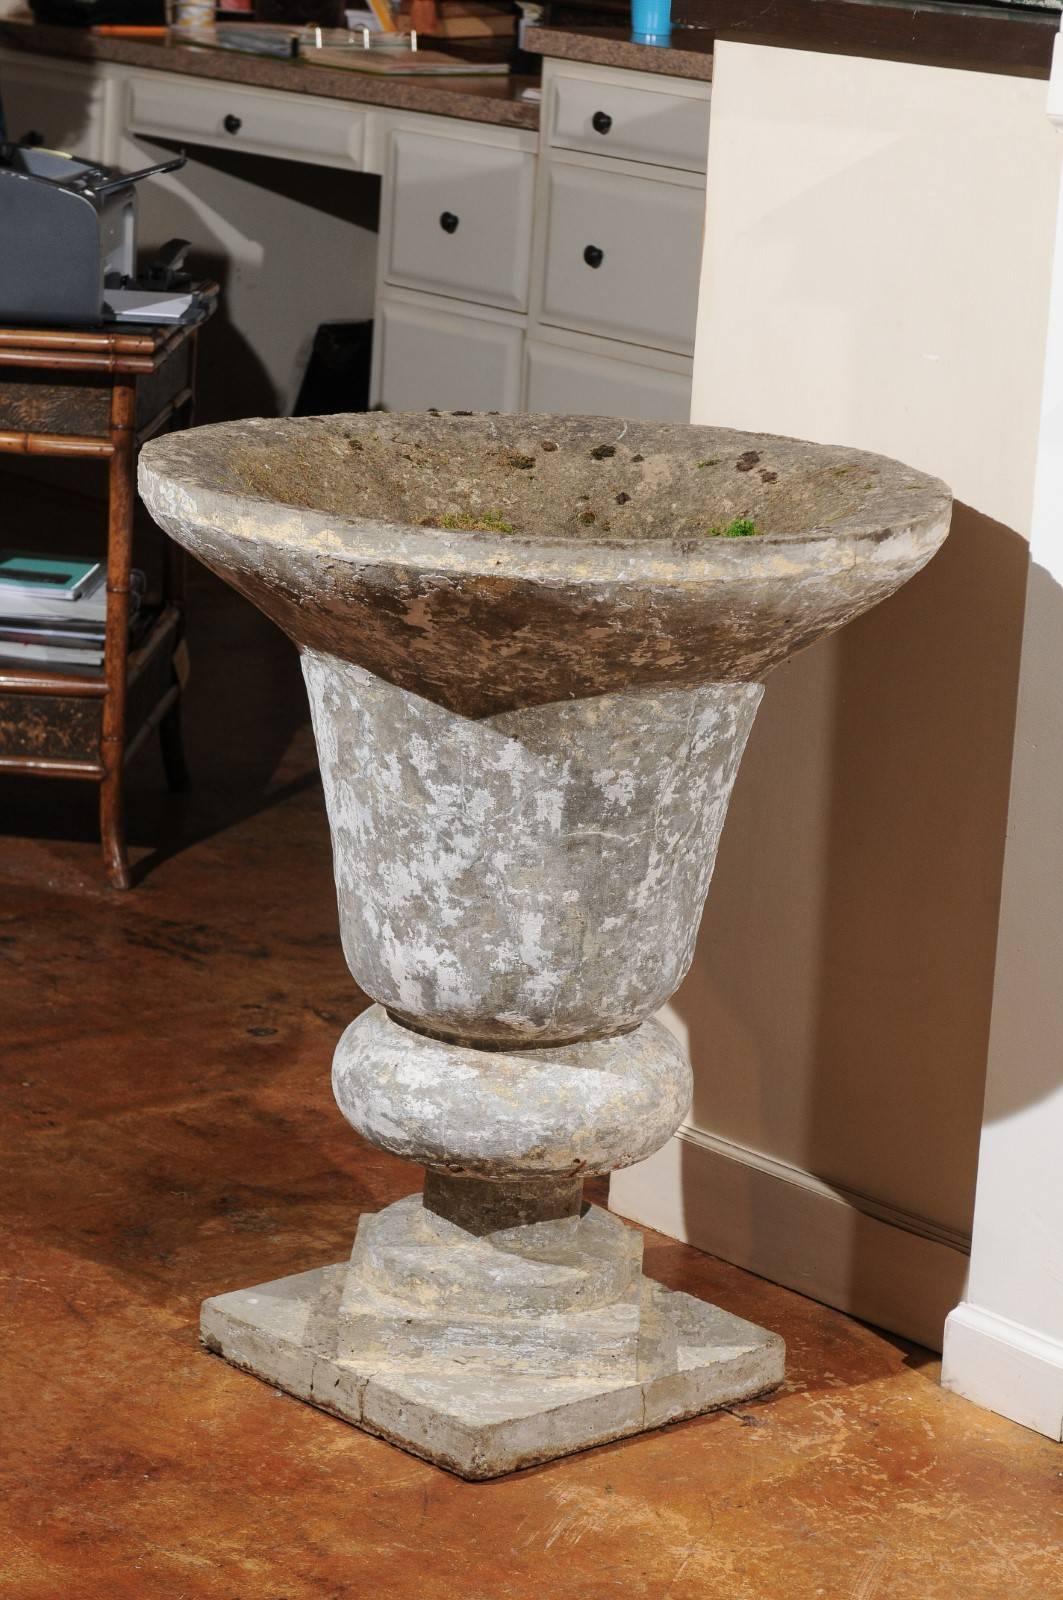 An English tall vintage stone urn raised on catty-corner square bases from the mid-20th century, with nicely weathered appearance. This English stone urn features an exquisite inverted bell shape with large lip in the upper section, raised on an